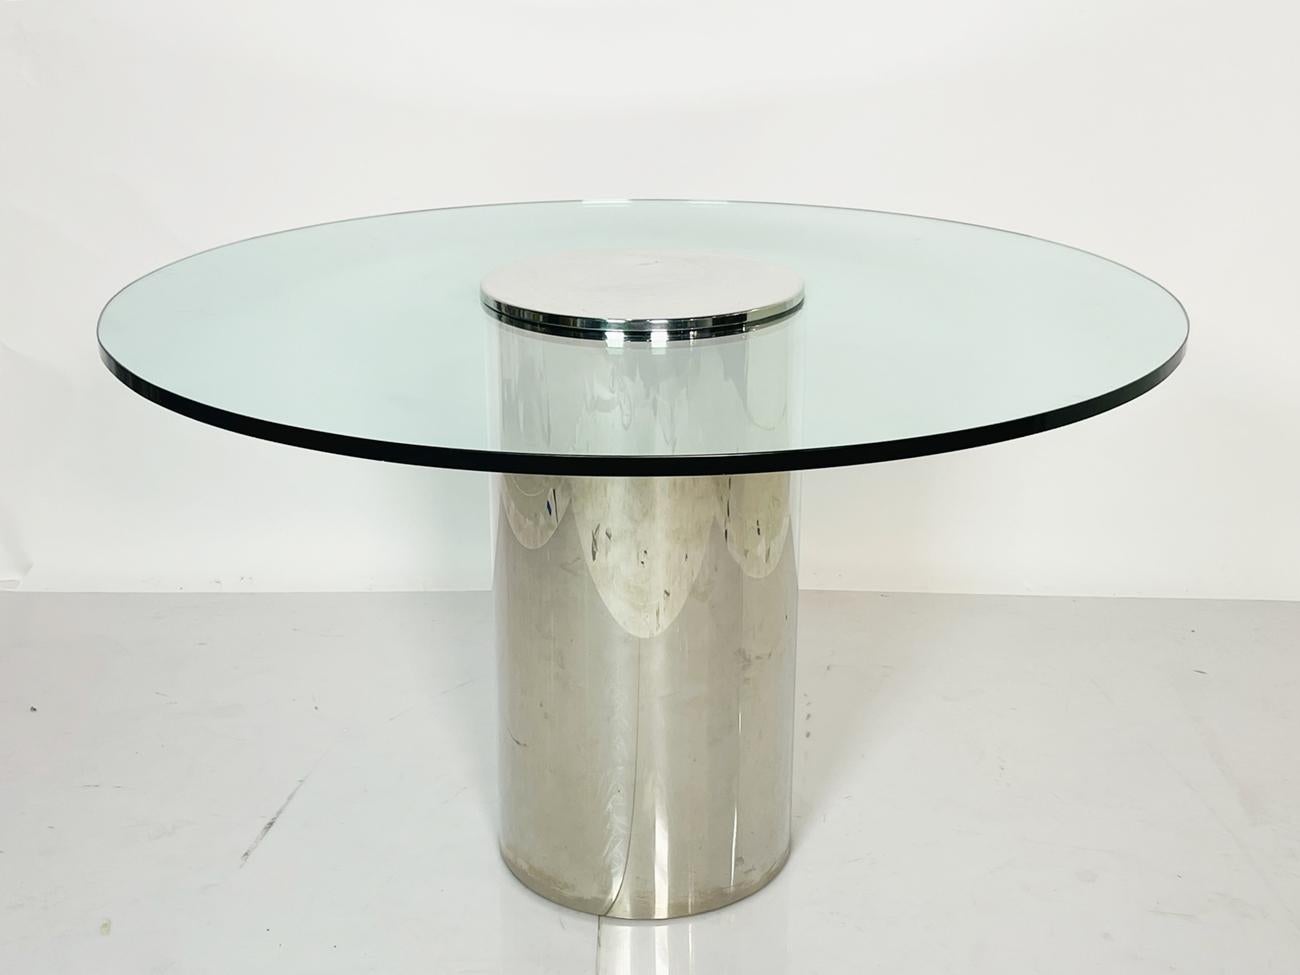 Introducing the stunning Chrome and Glass Pedestal Table by Pace Collection, Circa 1970s, the perfect addition to your home or office space. This beautifully crafted piece features a round glass table top that rests atop a sleek chrome metal base,